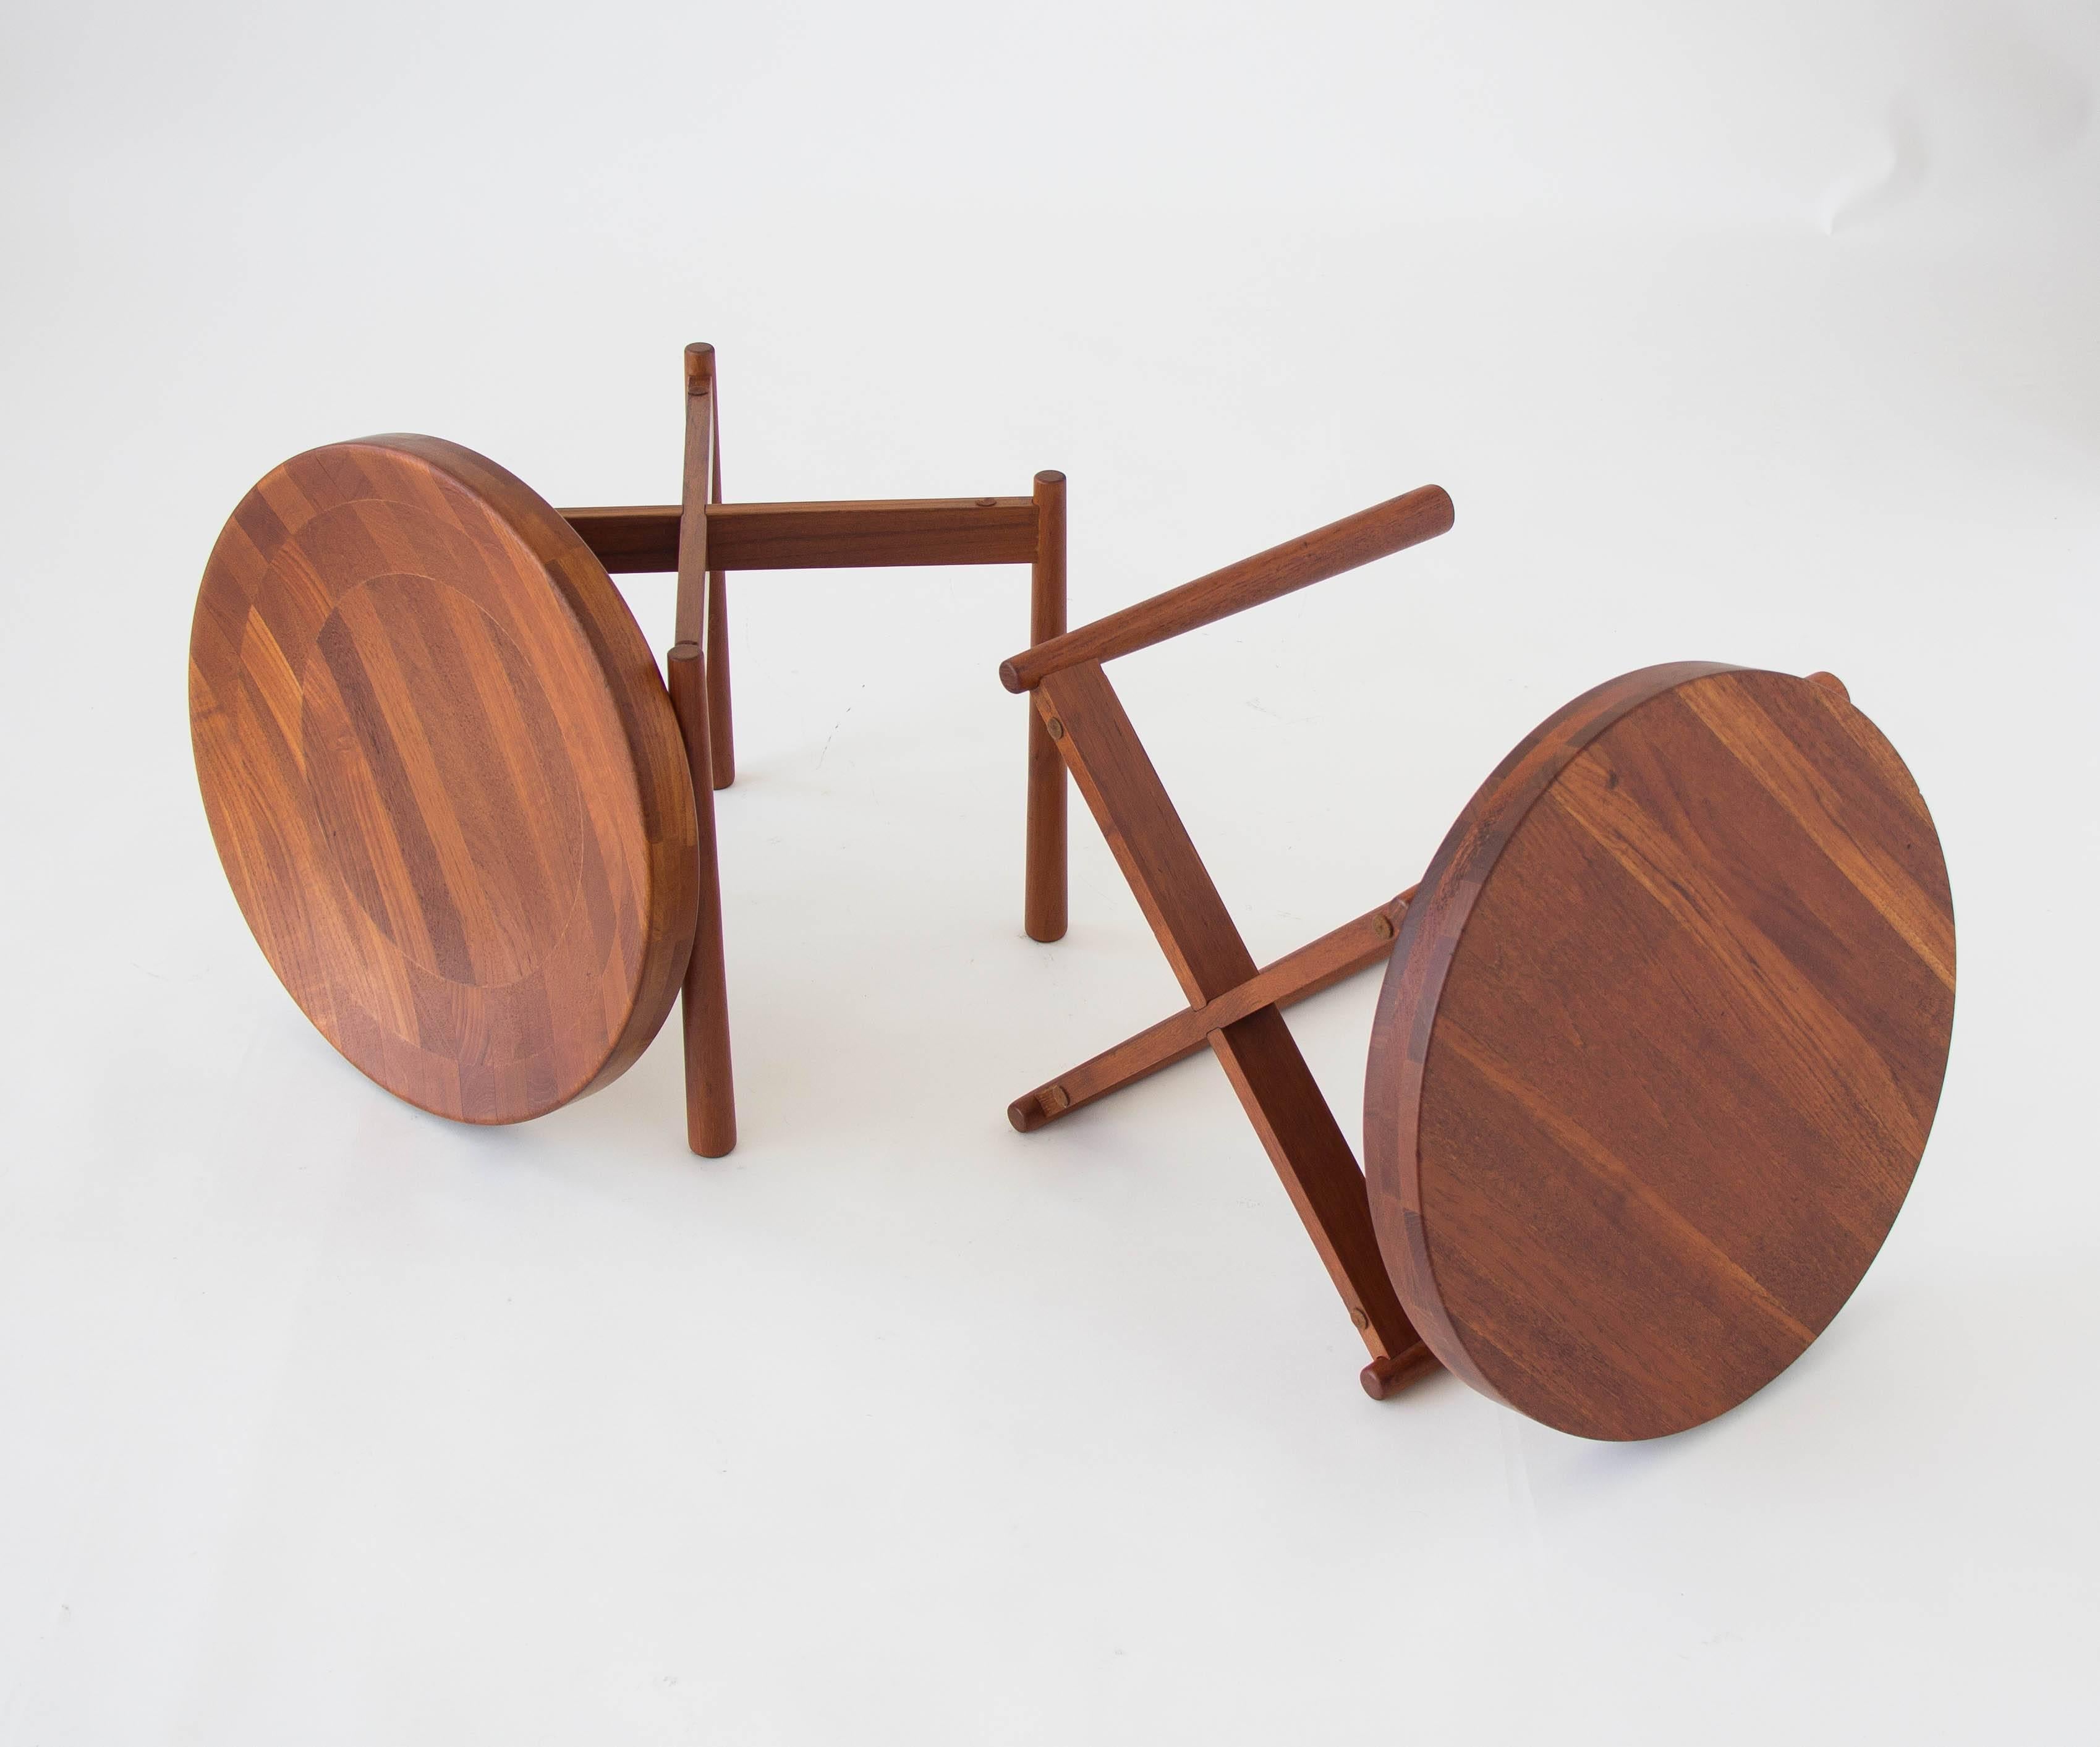 Pair of Teak Tray Tables in the style of Jens Quistgaard 1